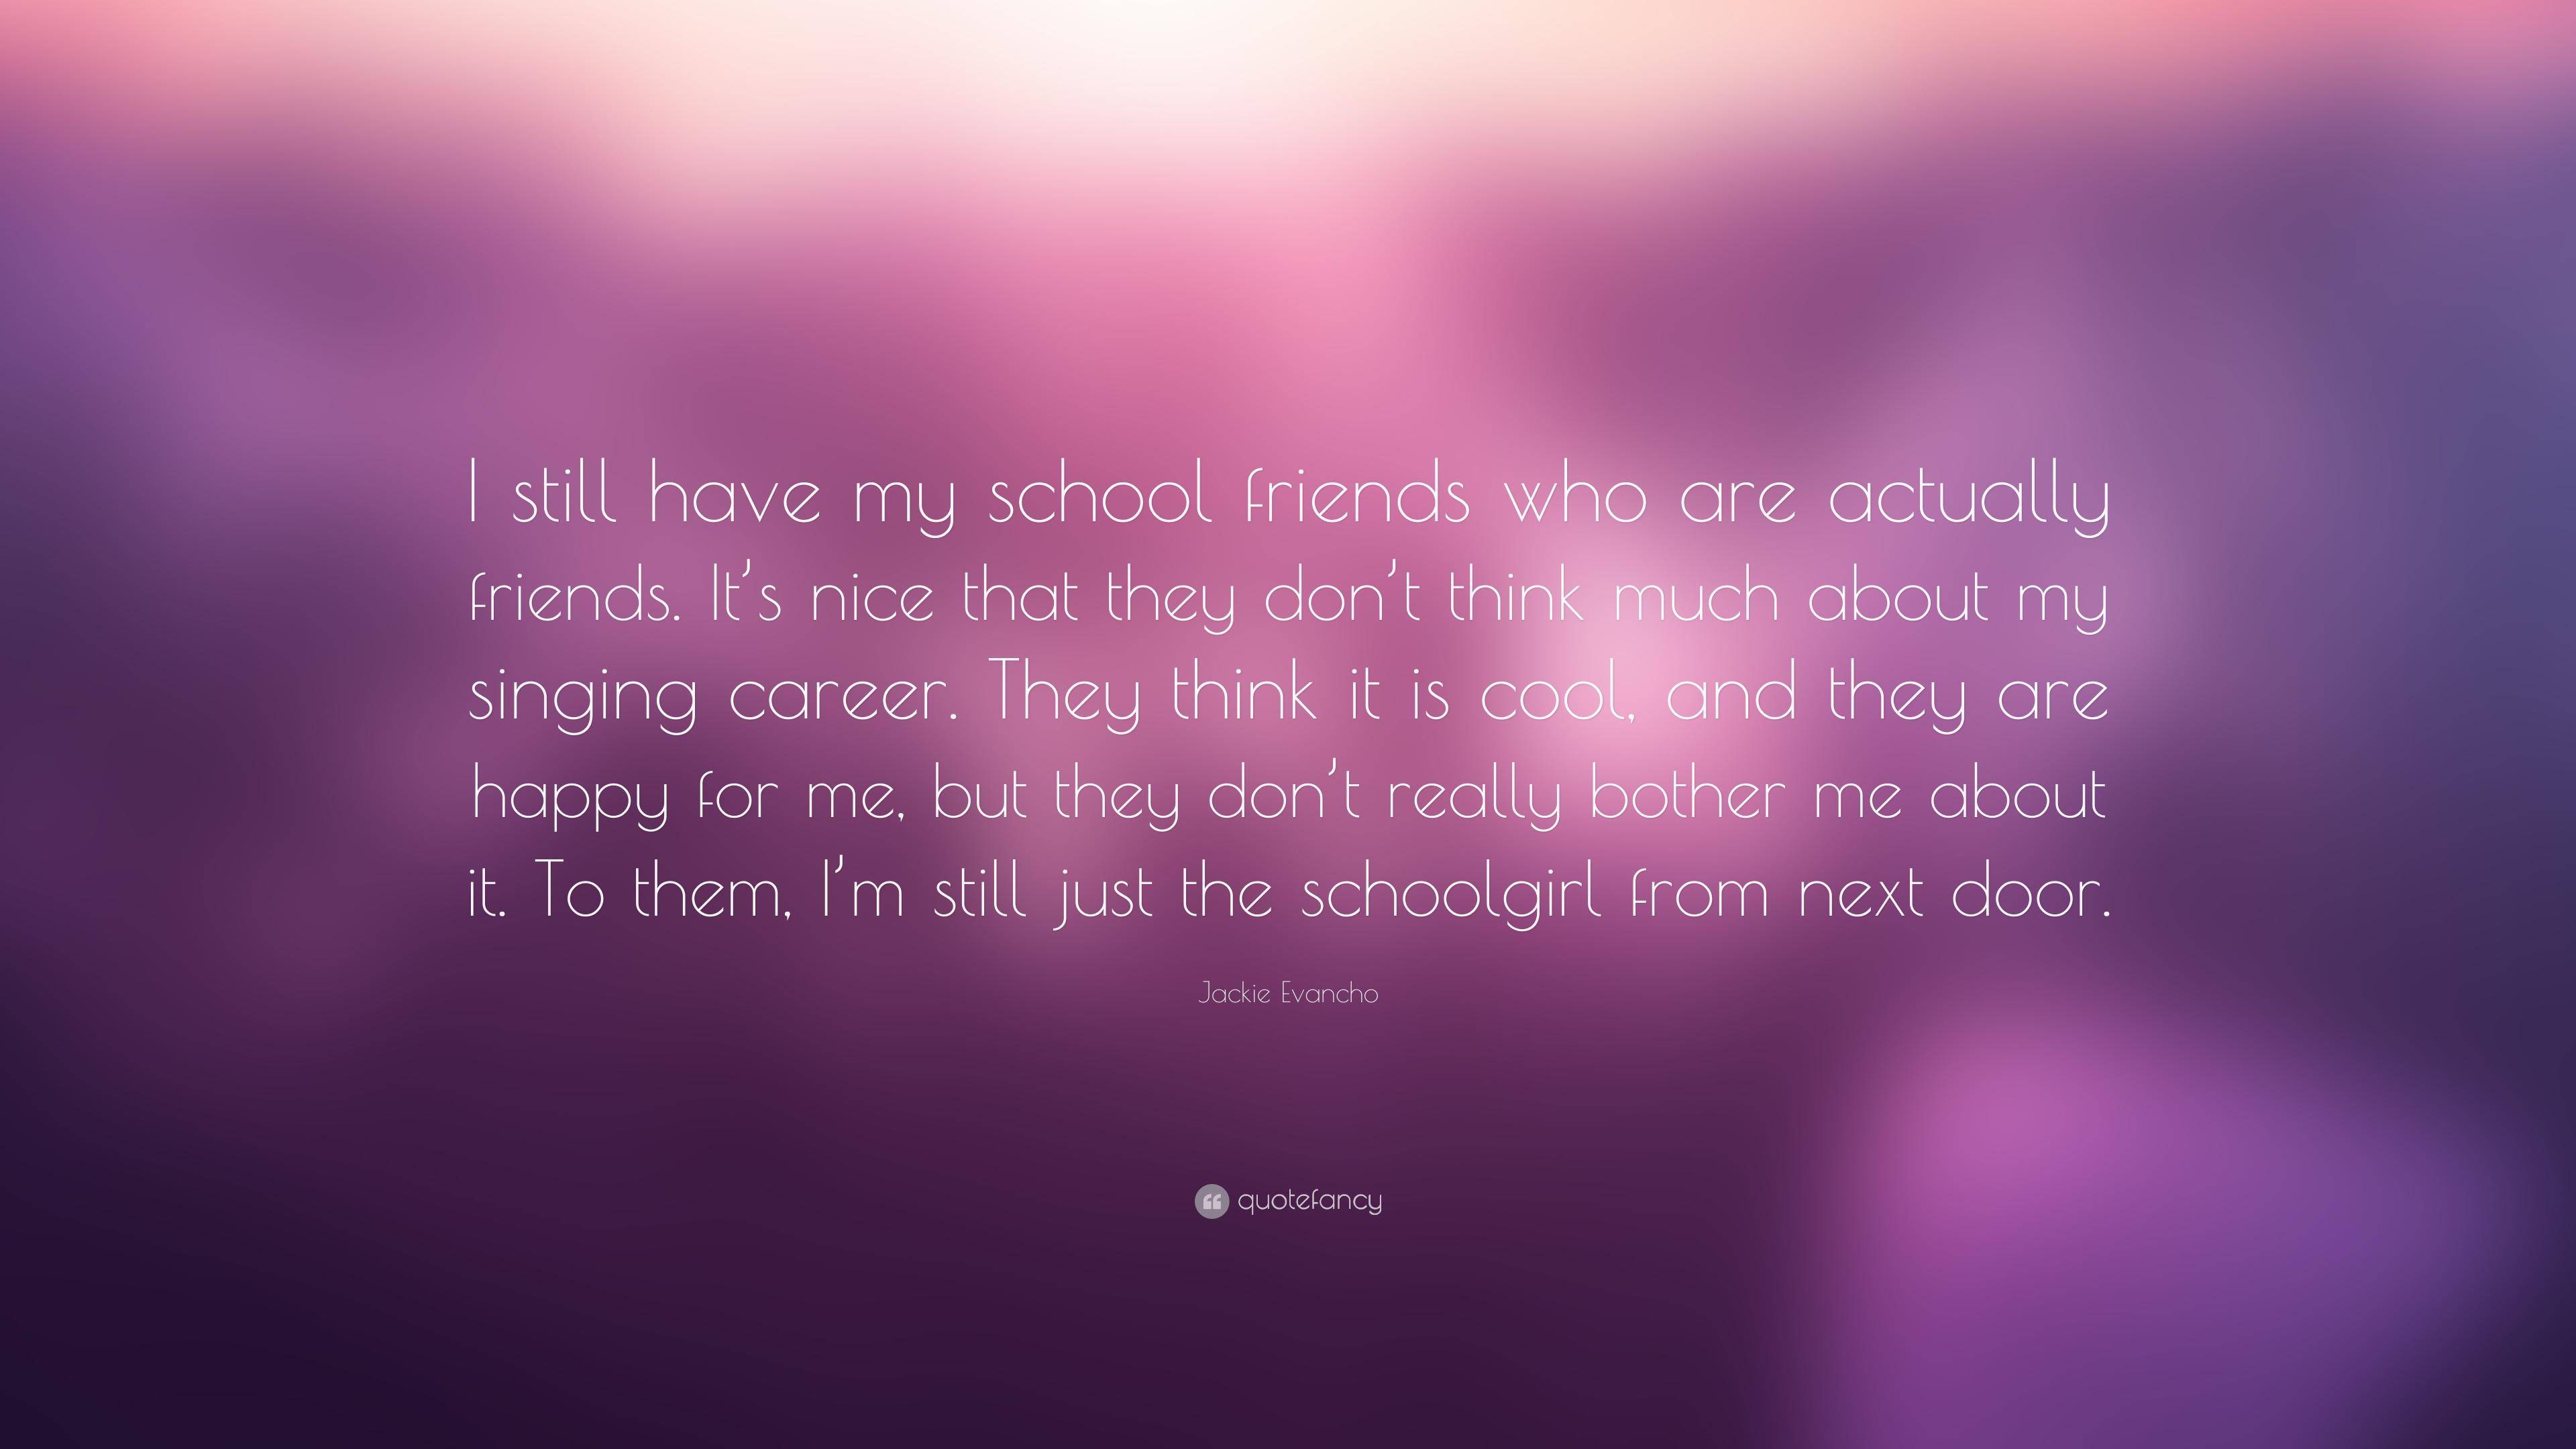 Jackie Evancho Quote: “I still have my school friends who are